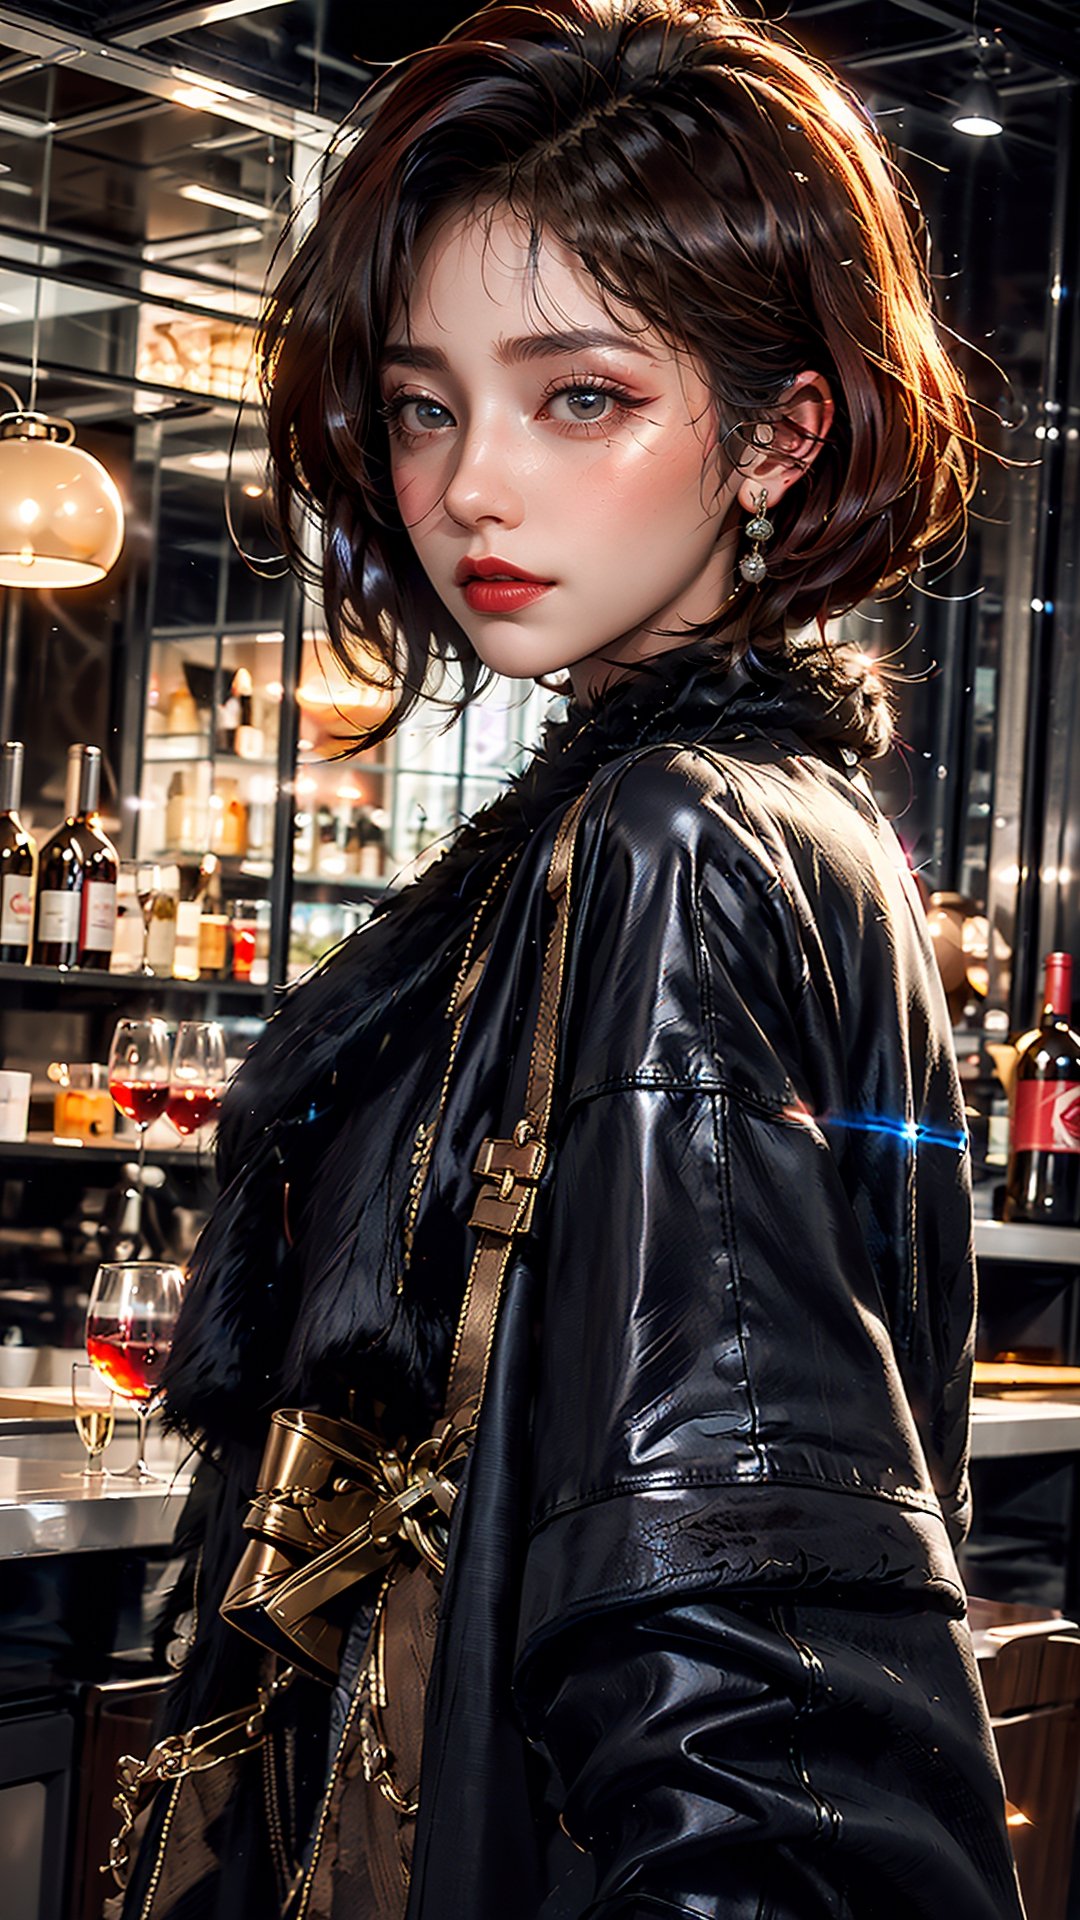 masterpiece,High definition,high resolution,best quality,glossy and clean skin,natural skin texture,soft light,face focus,short hair,red dyed hair,High detailed ,more detail,black luxurious fur coat,midjourney,Robocap,wine bar